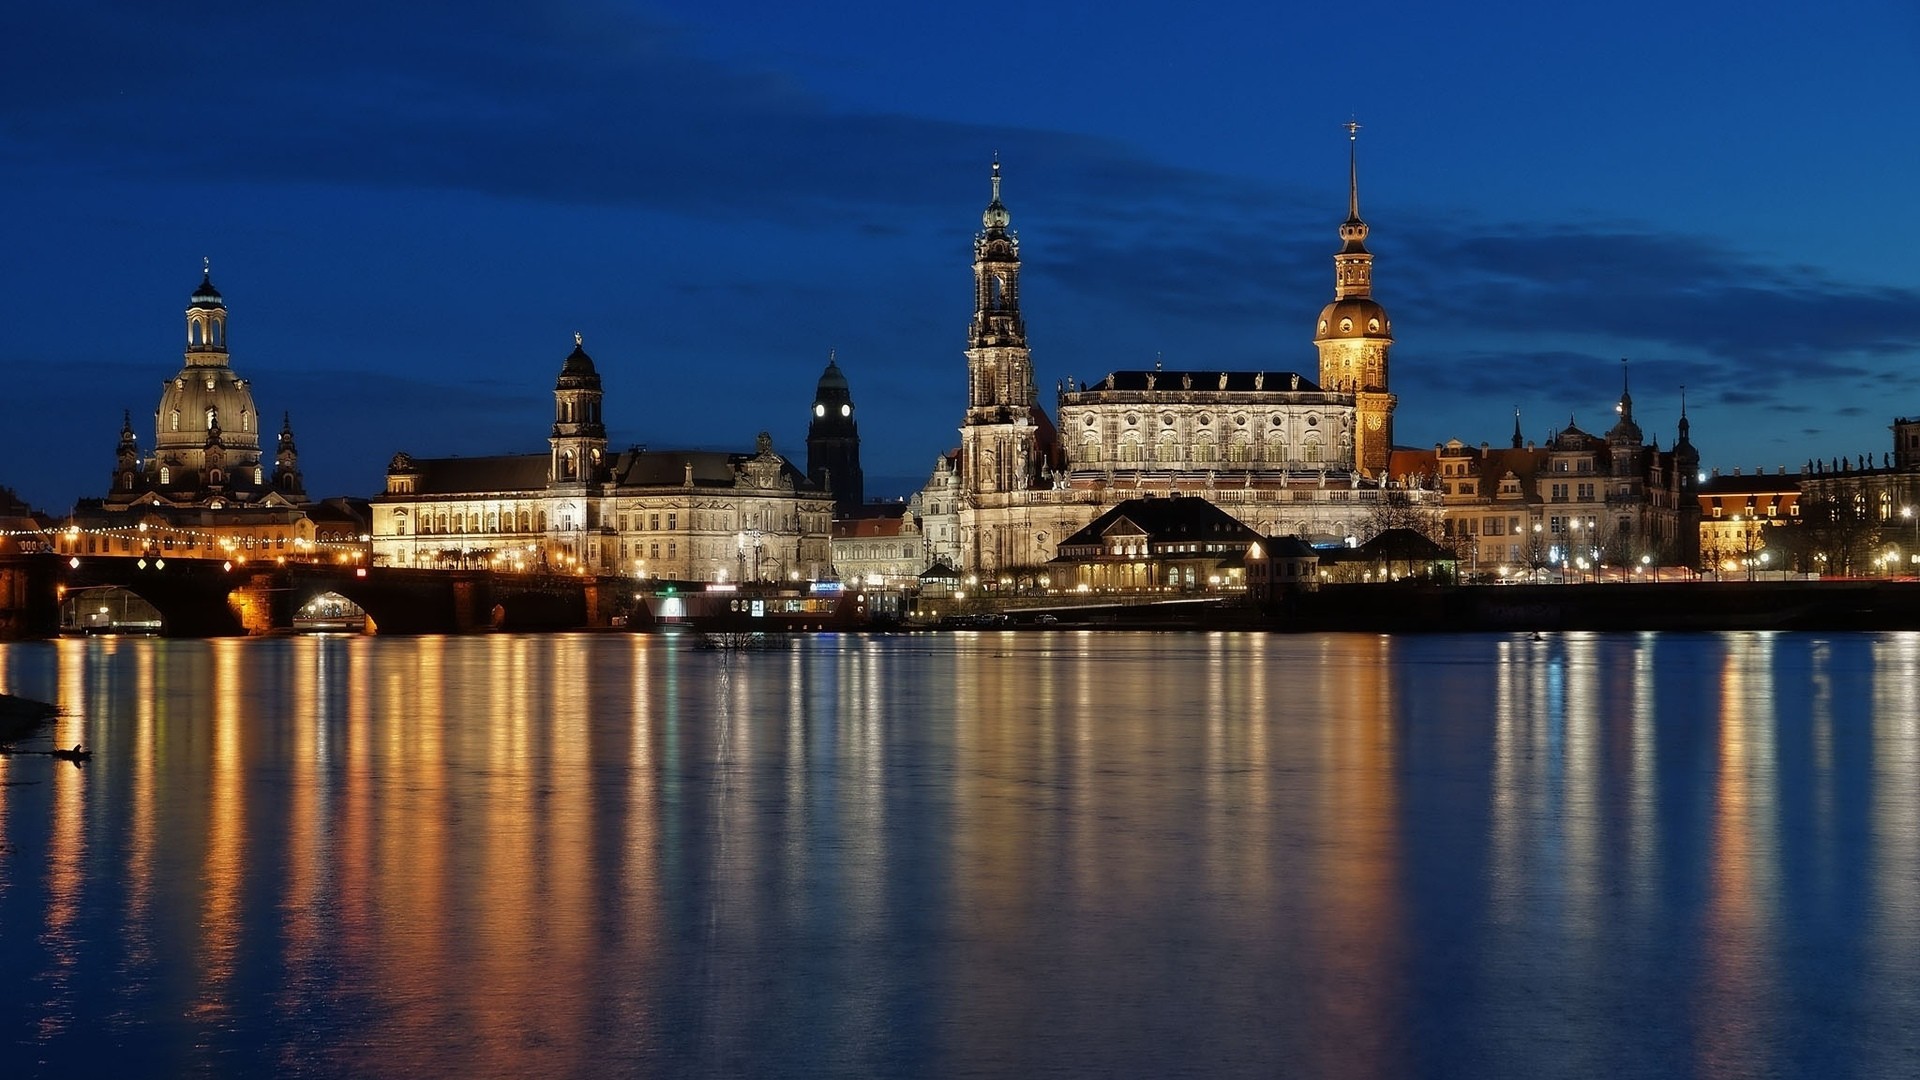 General 1920x1080 architecture old building lights evening city Dresden Germany water river church dome cathedral bridge reflection trees clouds tower